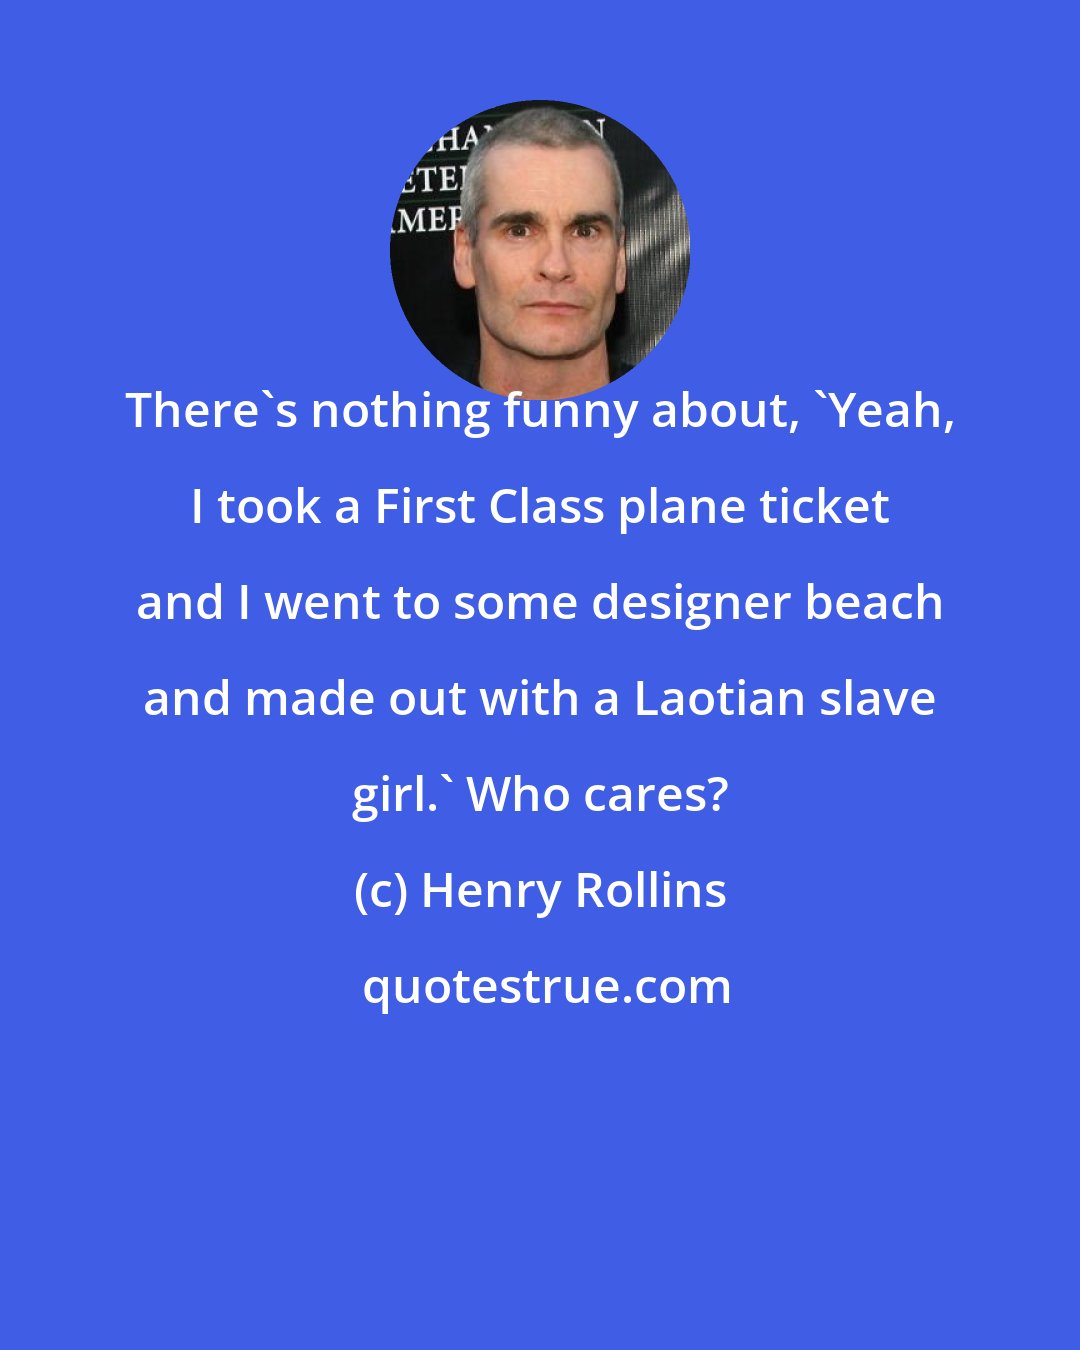 Henry Rollins: There's nothing funny about, 'Yeah, I took a First Class plane ticket and I went to some designer beach and made out with a Laotian slave girl.' Who cares?